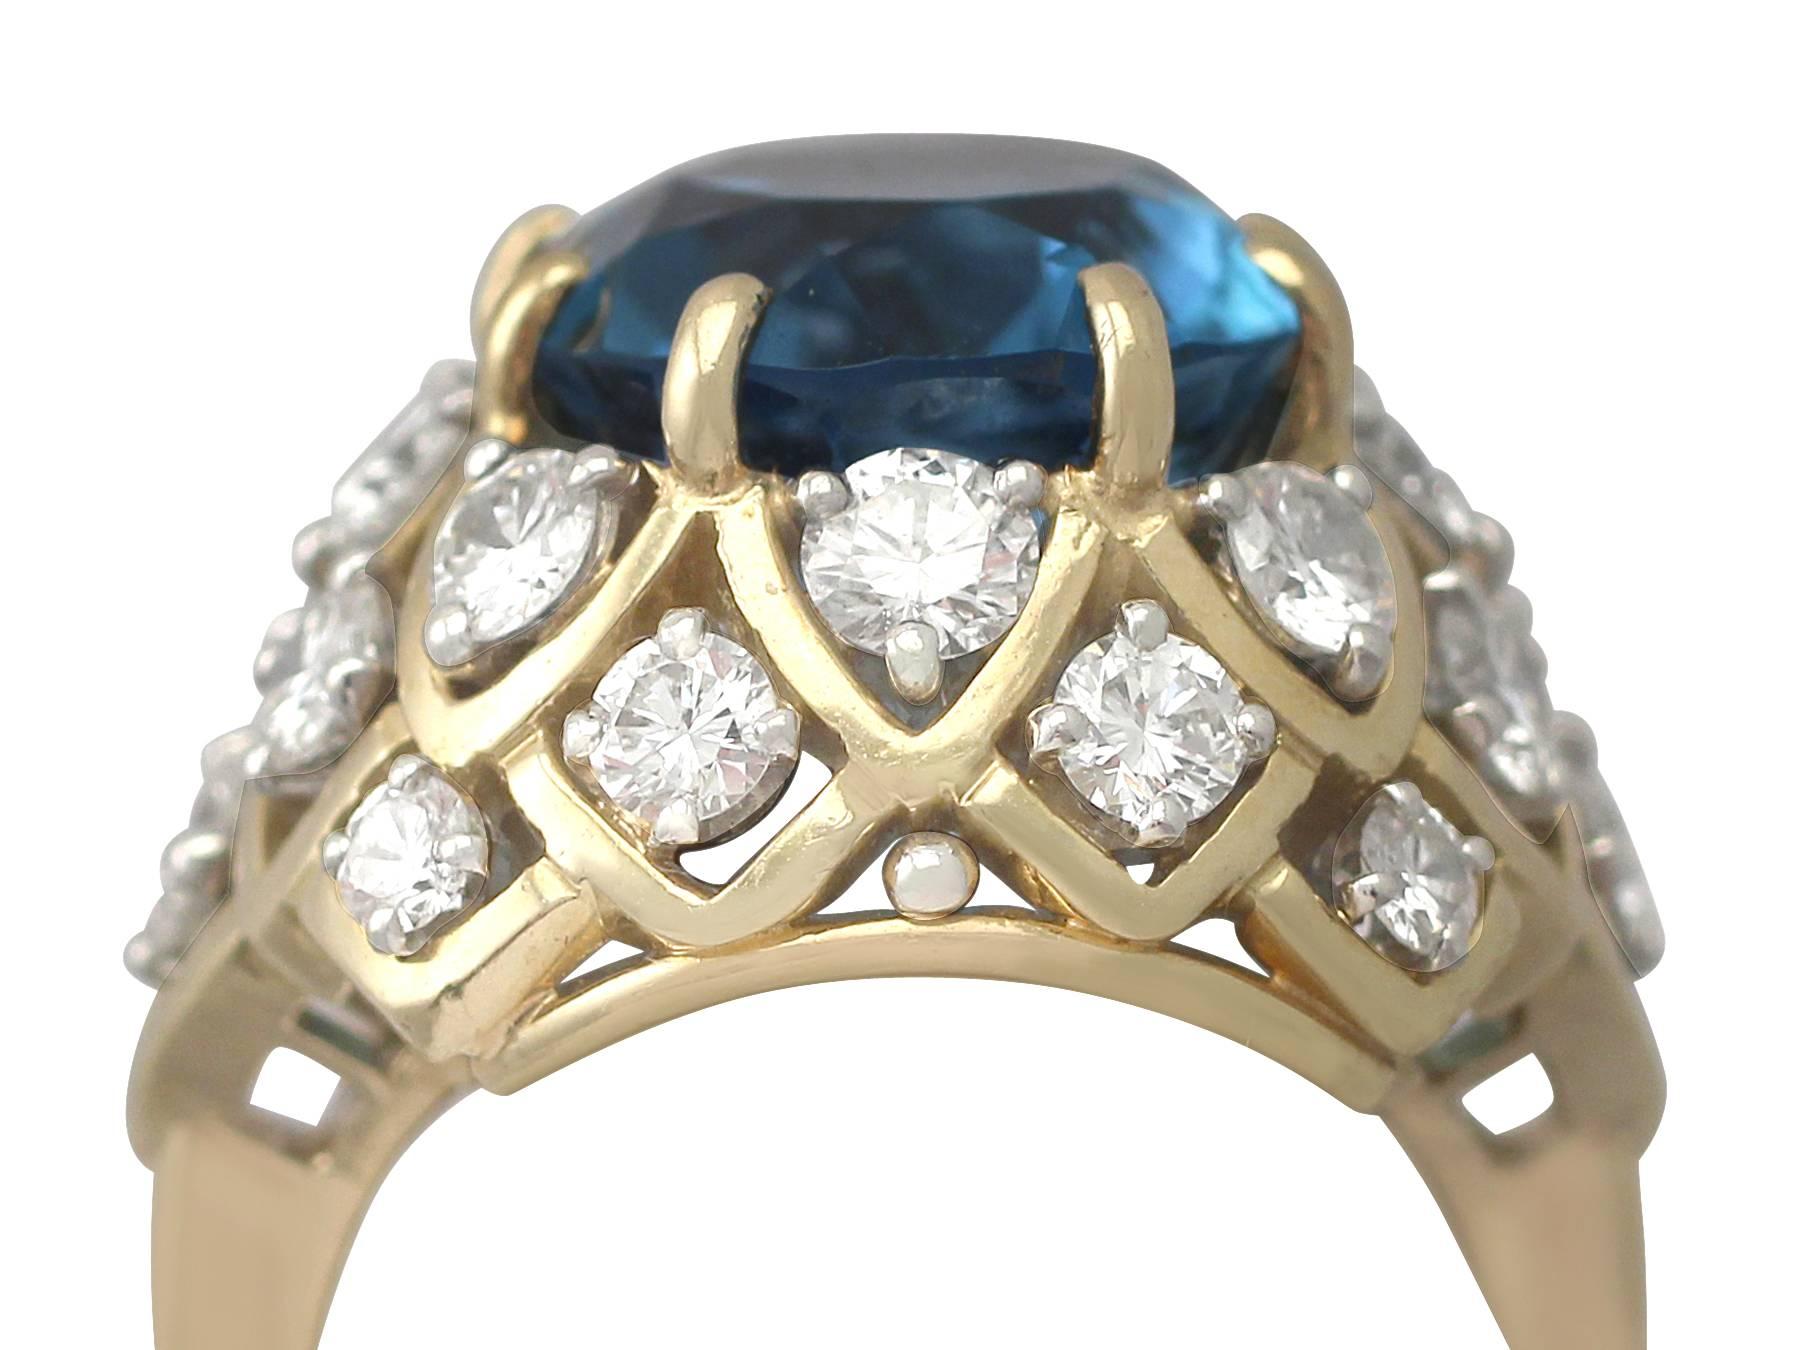 A stunning, fine and impressive 10.73 carat blue topaz and 2.56 carat diamond, 18 karat yellow gold and 18 karat white gold set dress ring; part of our diverse gemstone jewelry collection

This stunning, fine and impressive blue topaz dress ring has